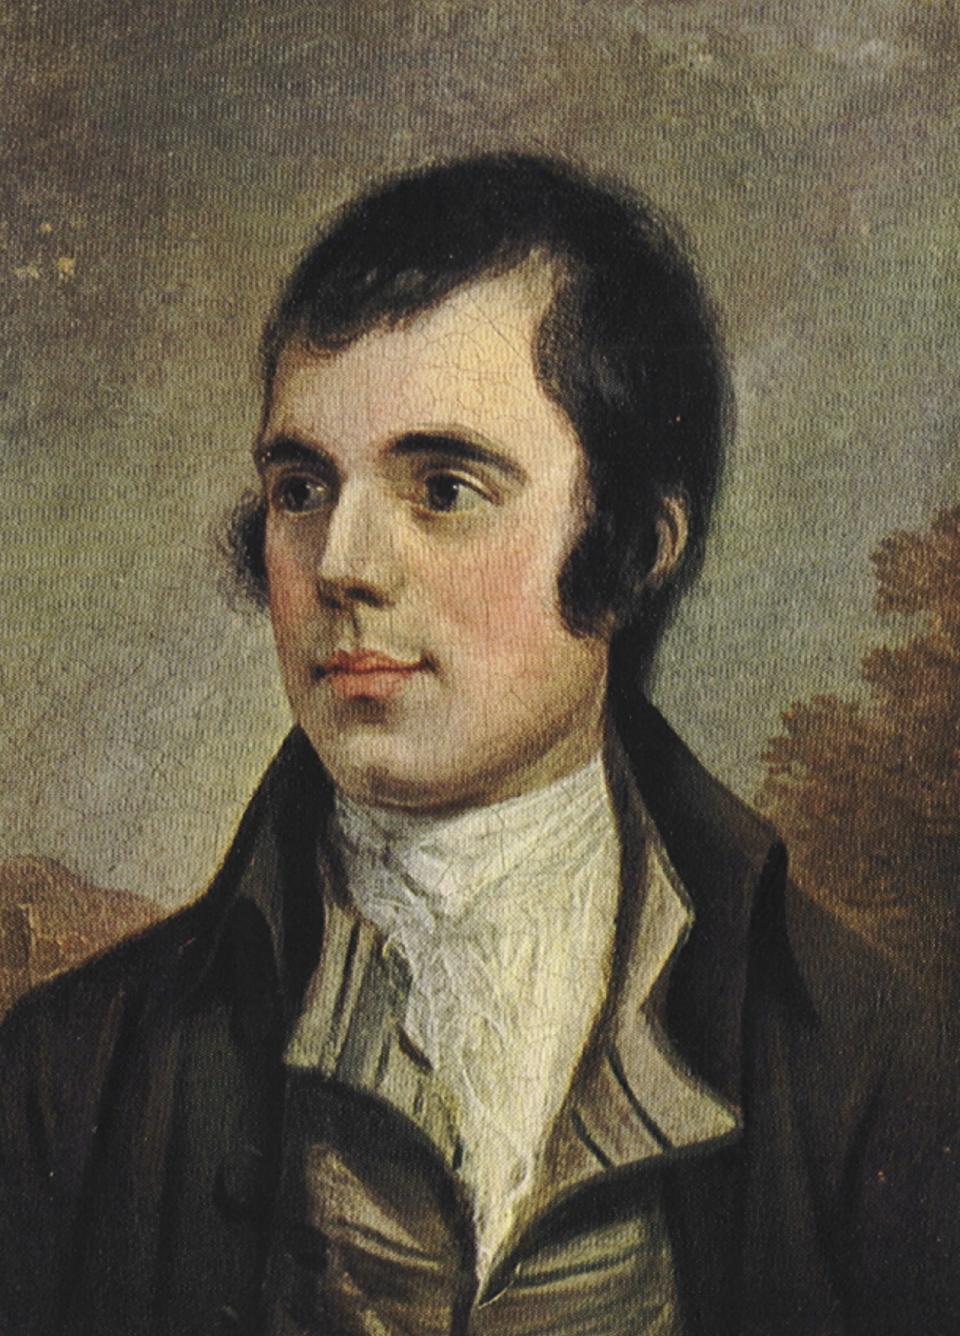 Robert Burns is depicted in this painting by Alexander Nasmyth. A Scottish bard, Burns went about reciting sometimes ribald stories through poetry and folk songs. His birthday is celebrated with traditional Scottish food and festivities.